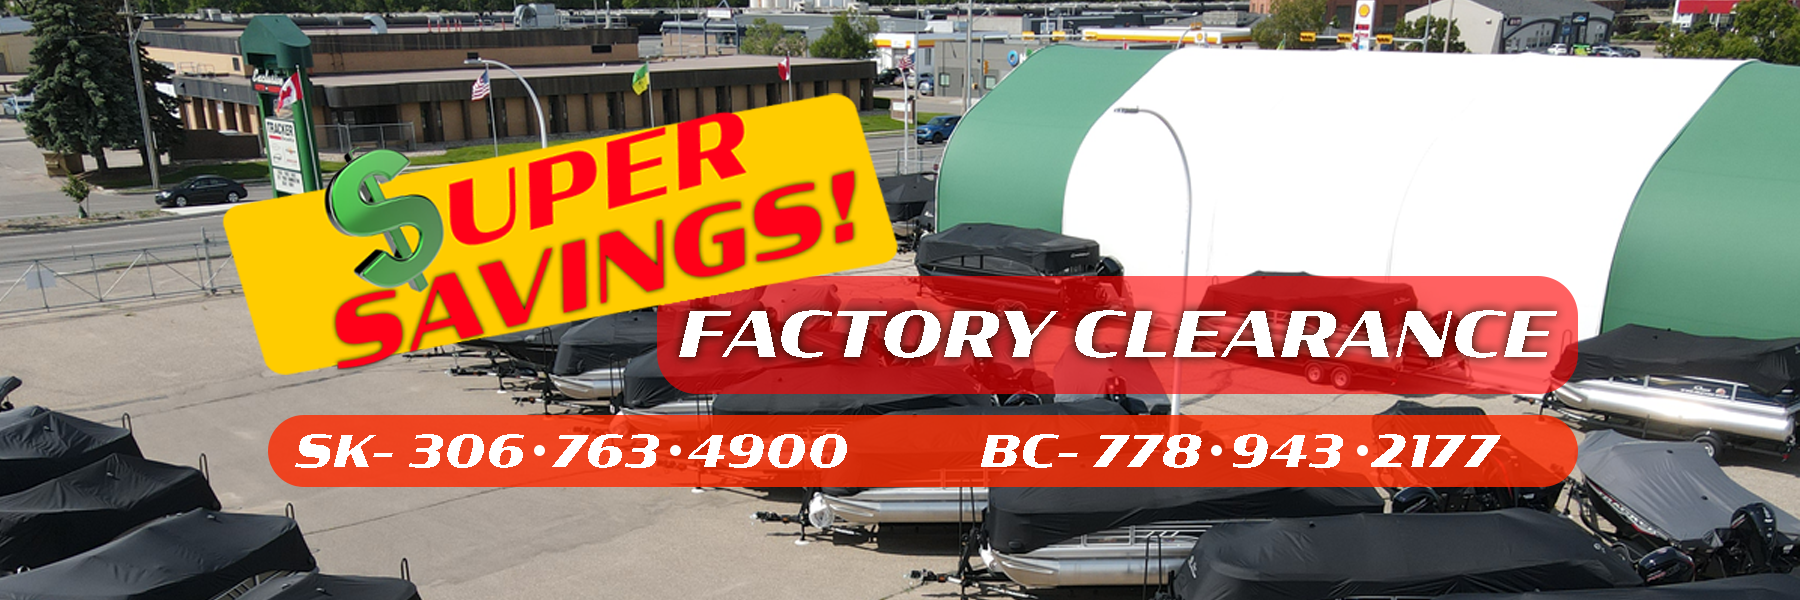 SUPER SAVINGS FACTORY CLEARANCE